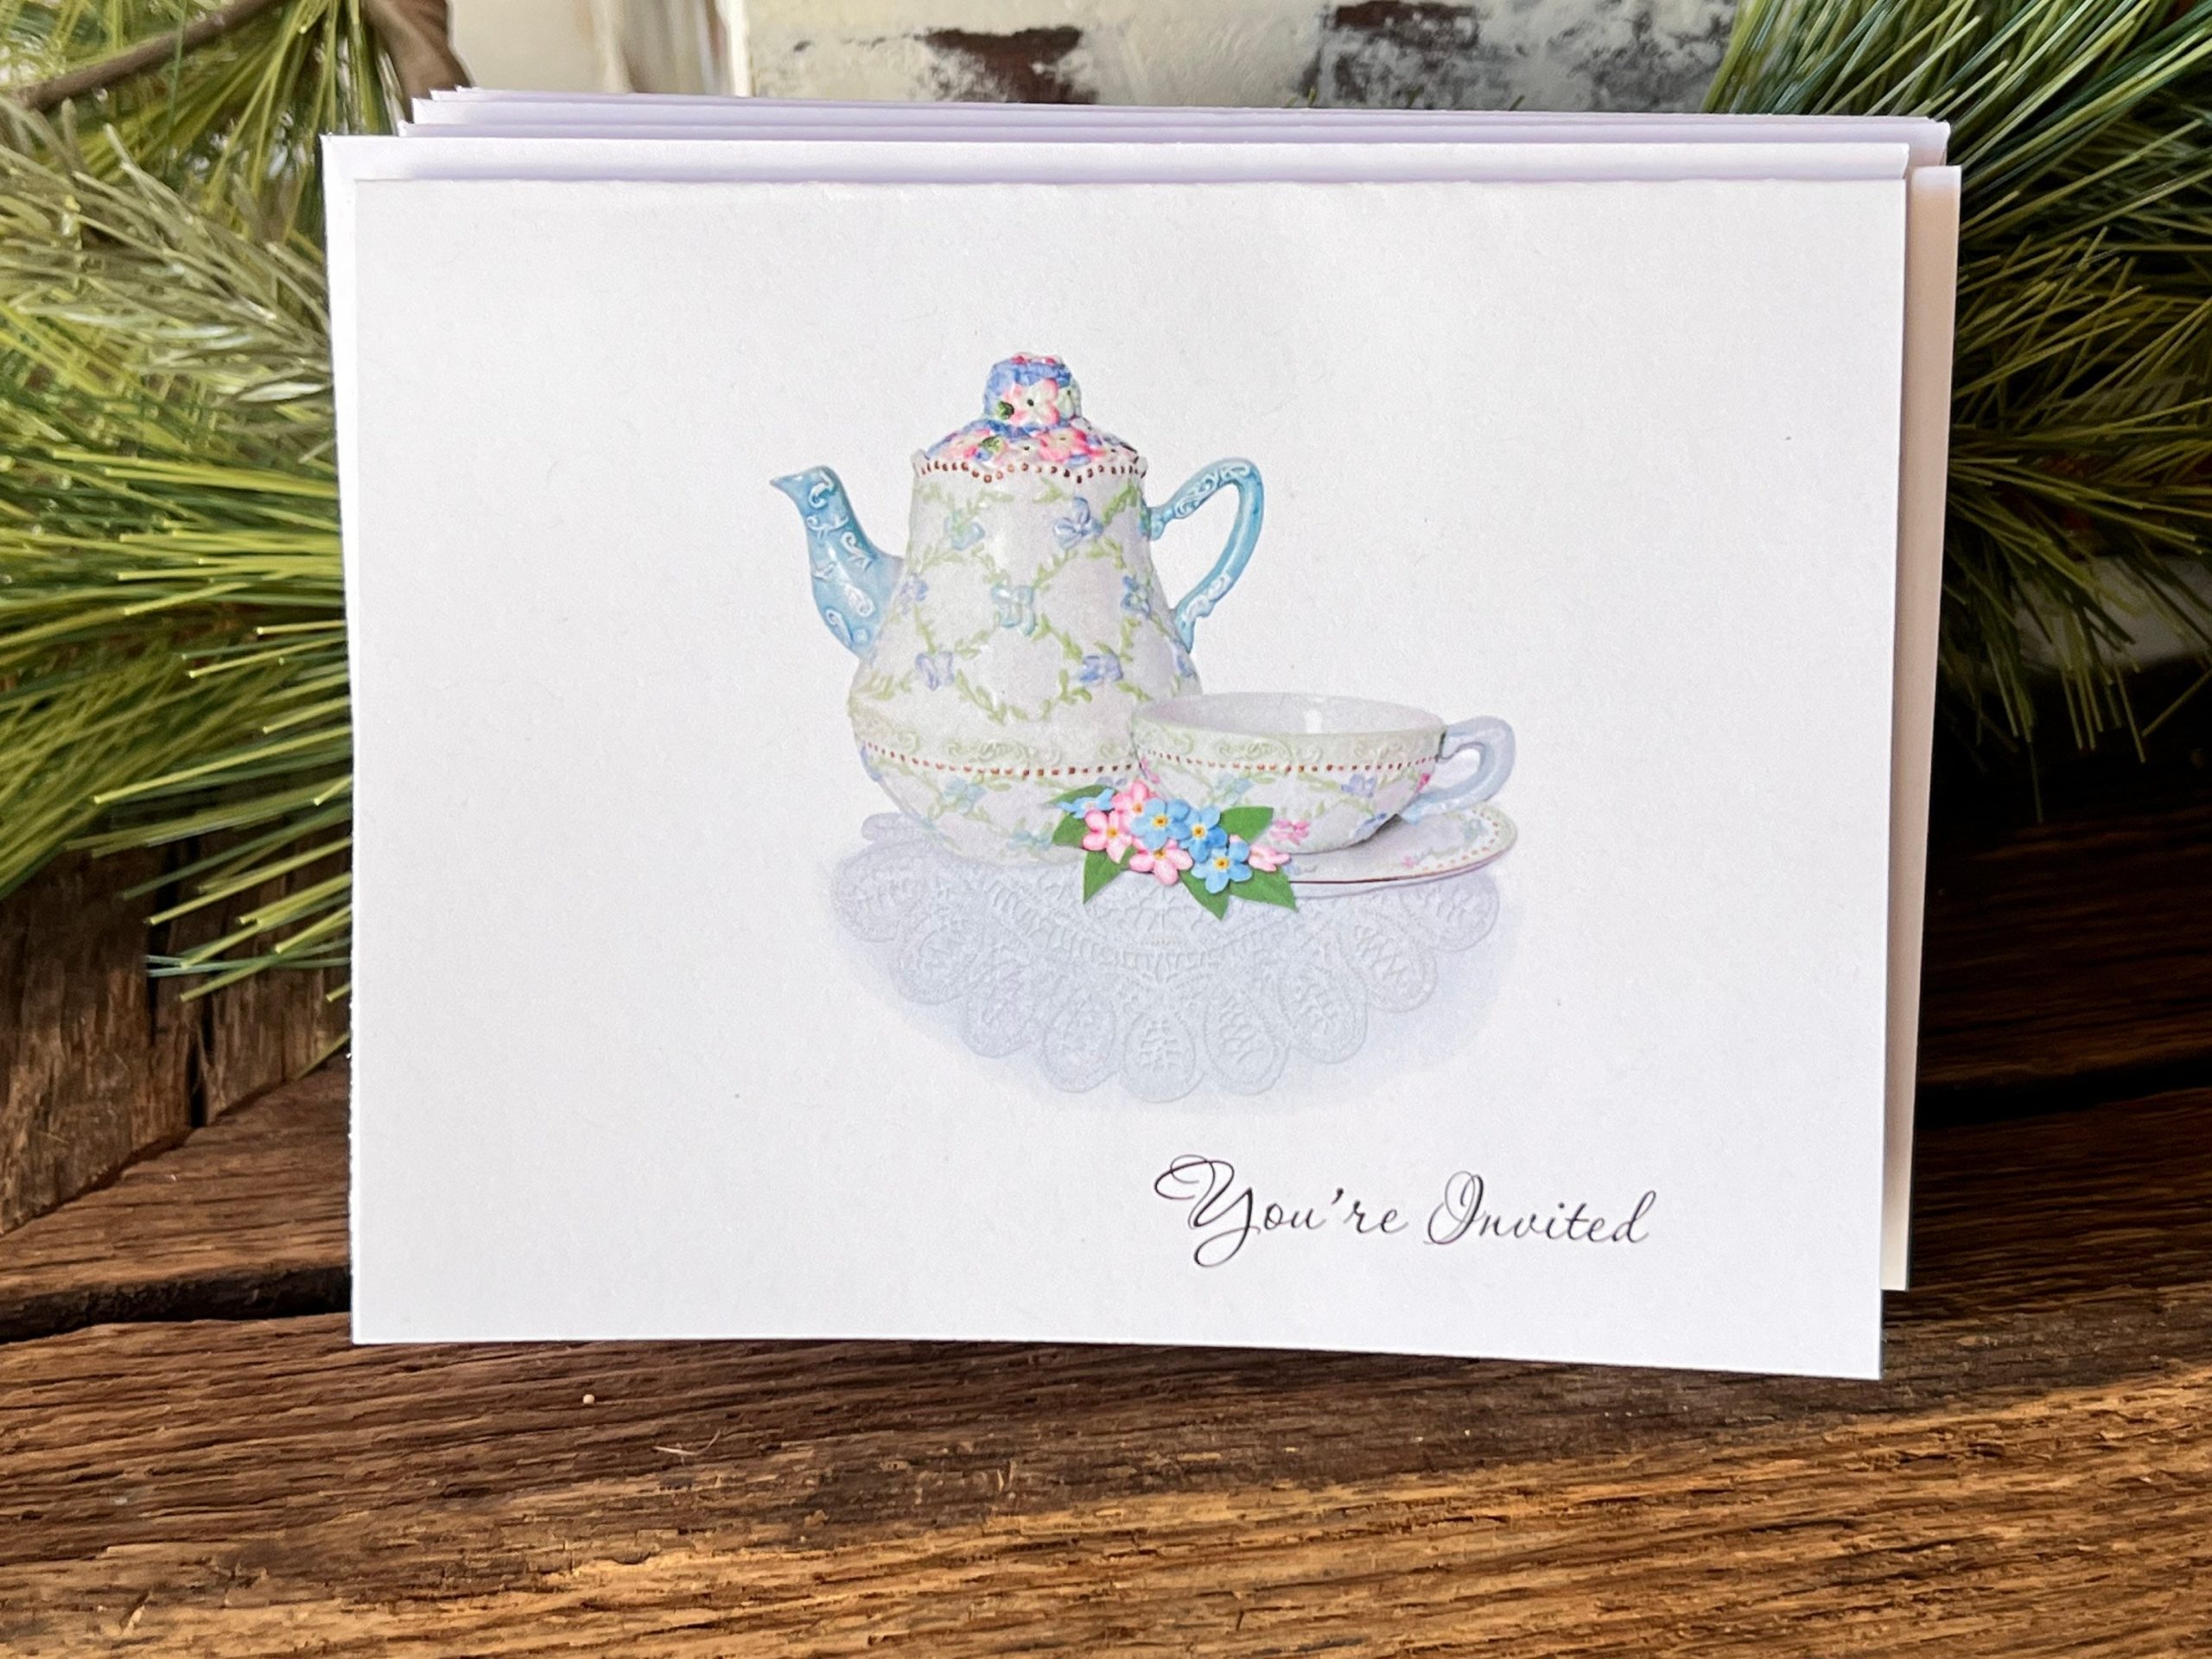 Personalized Folded Note Cards with Envelopes